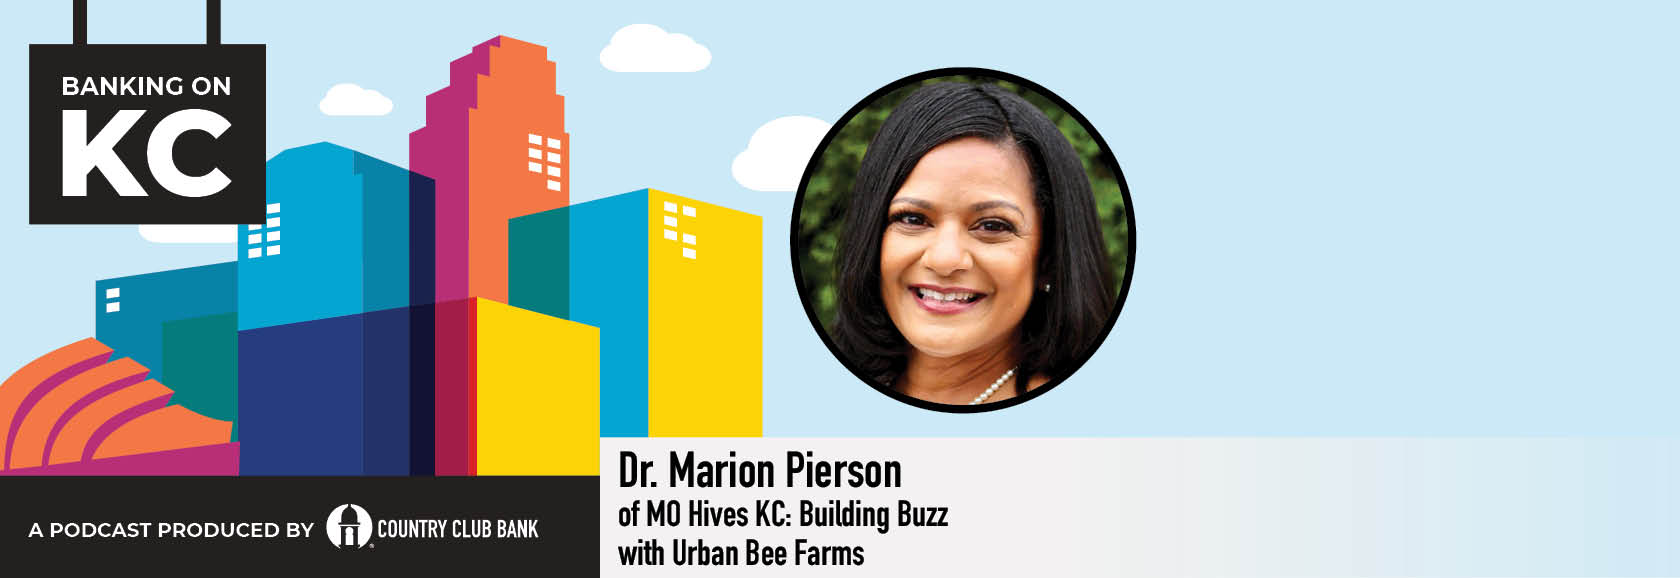 Banking on KC – Dr. Marion Pierson of MO Hives KC